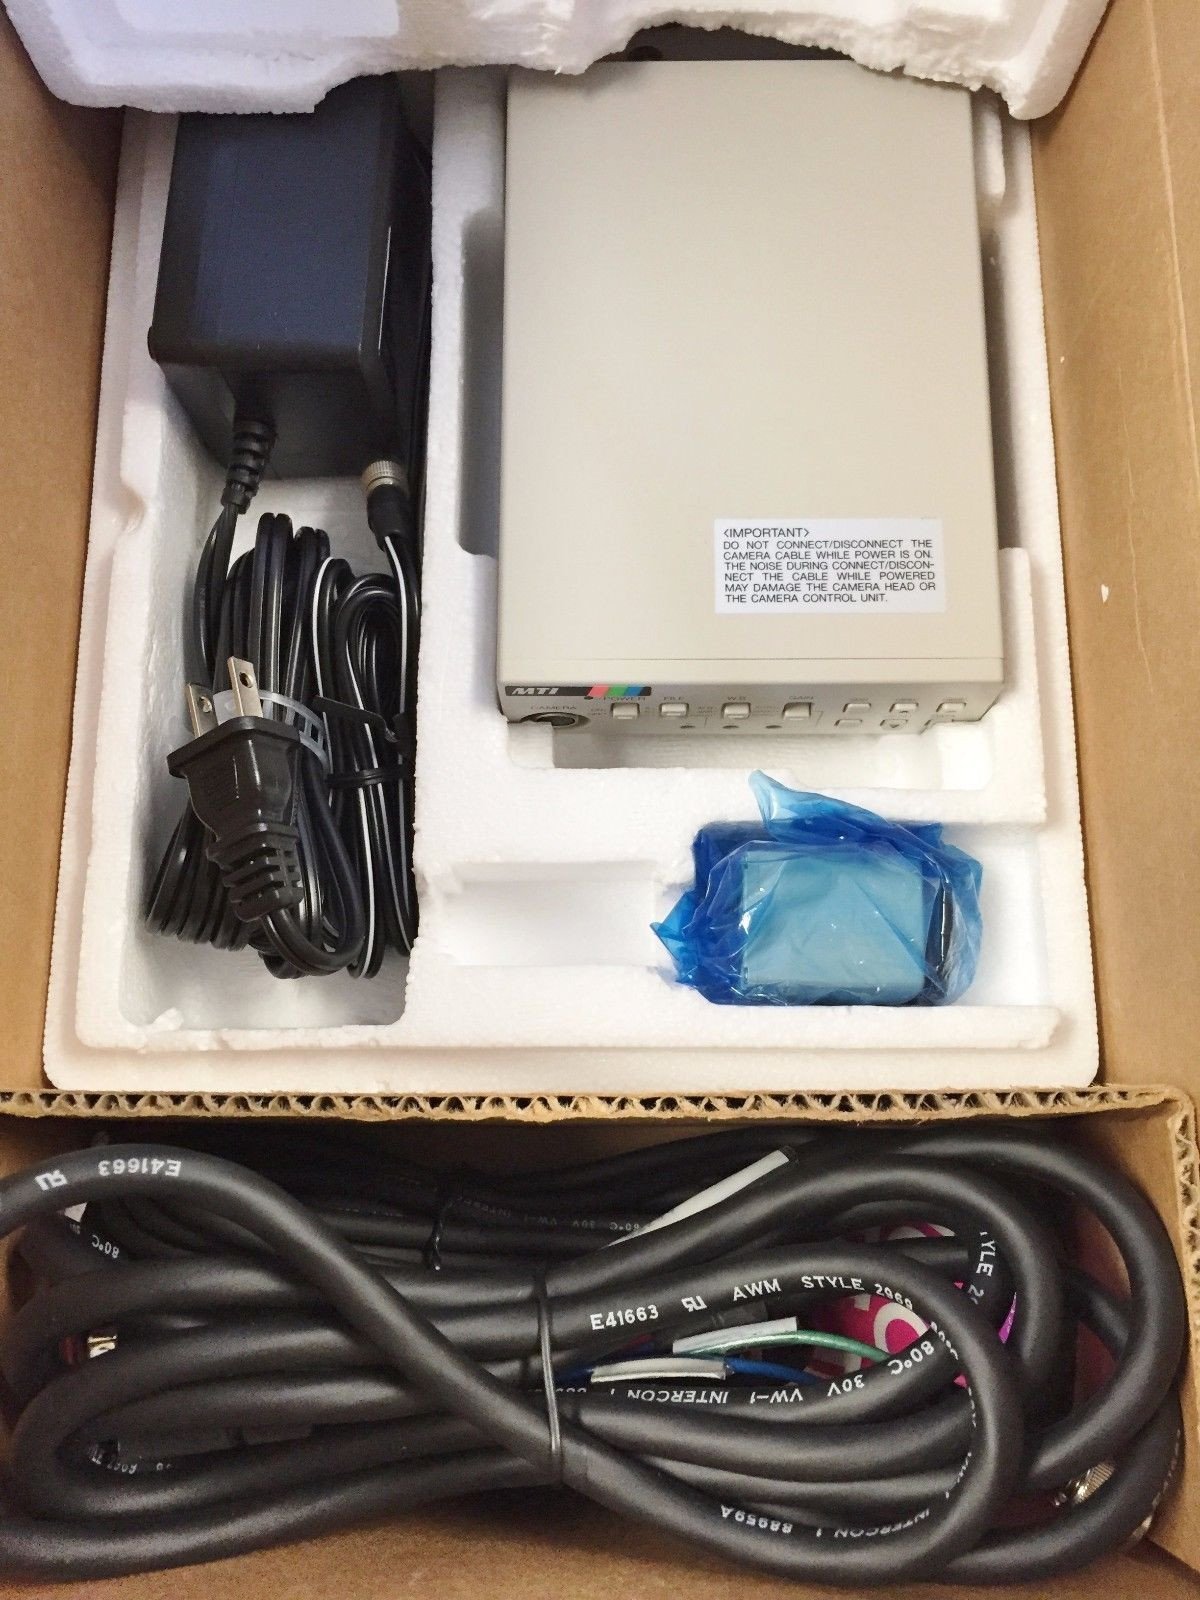 .Dage MTI DC-330 3CCD Color Digital Camera with Controller and Cables